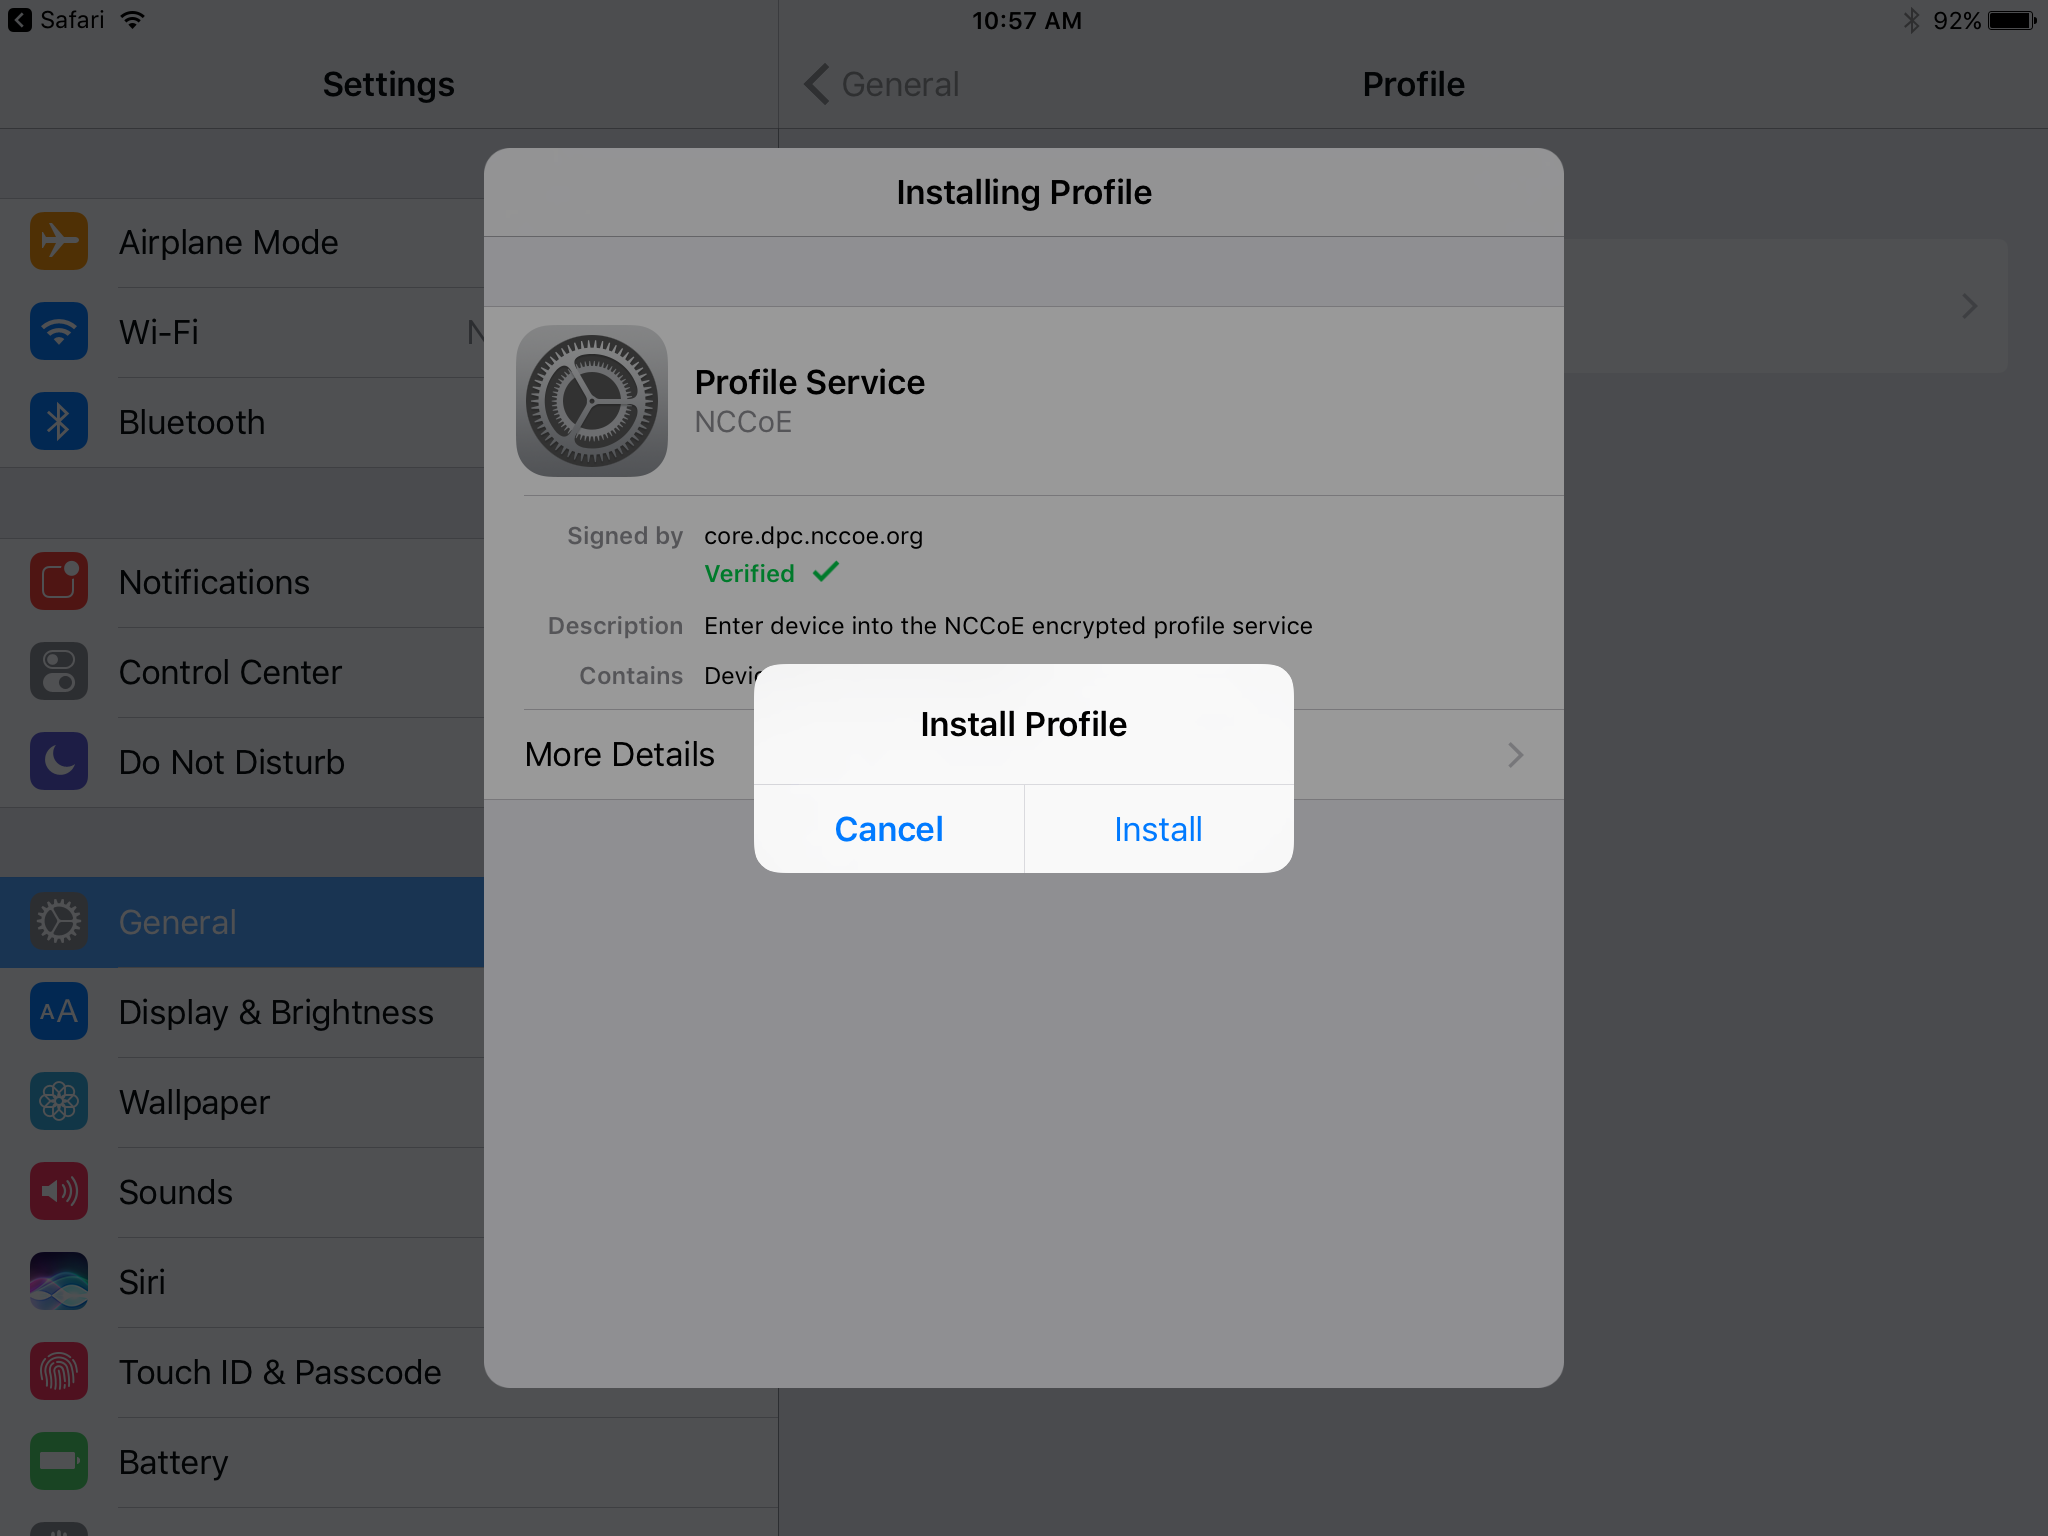 Settings app prompts the user to confirm the intention to install the MobileIron profile.